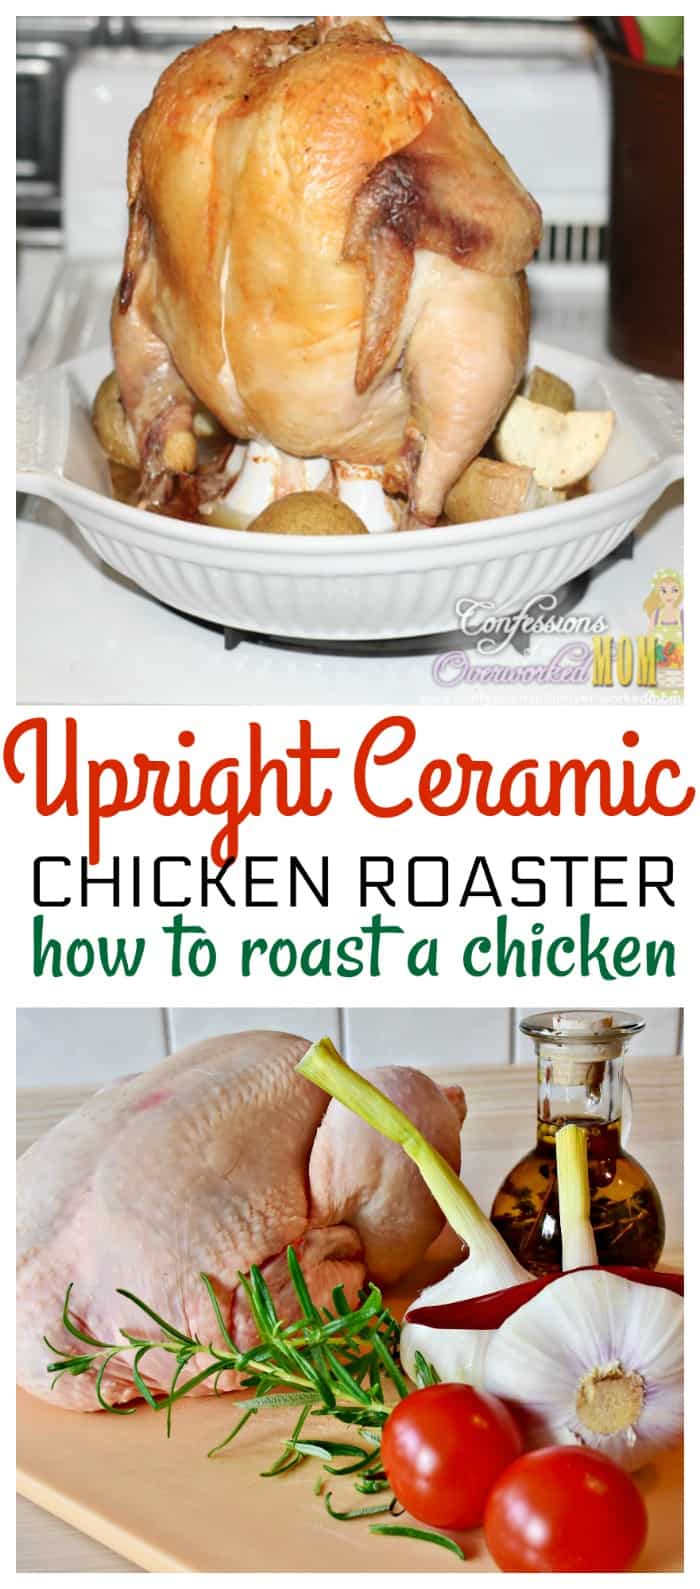 Upright Chicken Roaster from Reco for the Juciest Chicken Ever